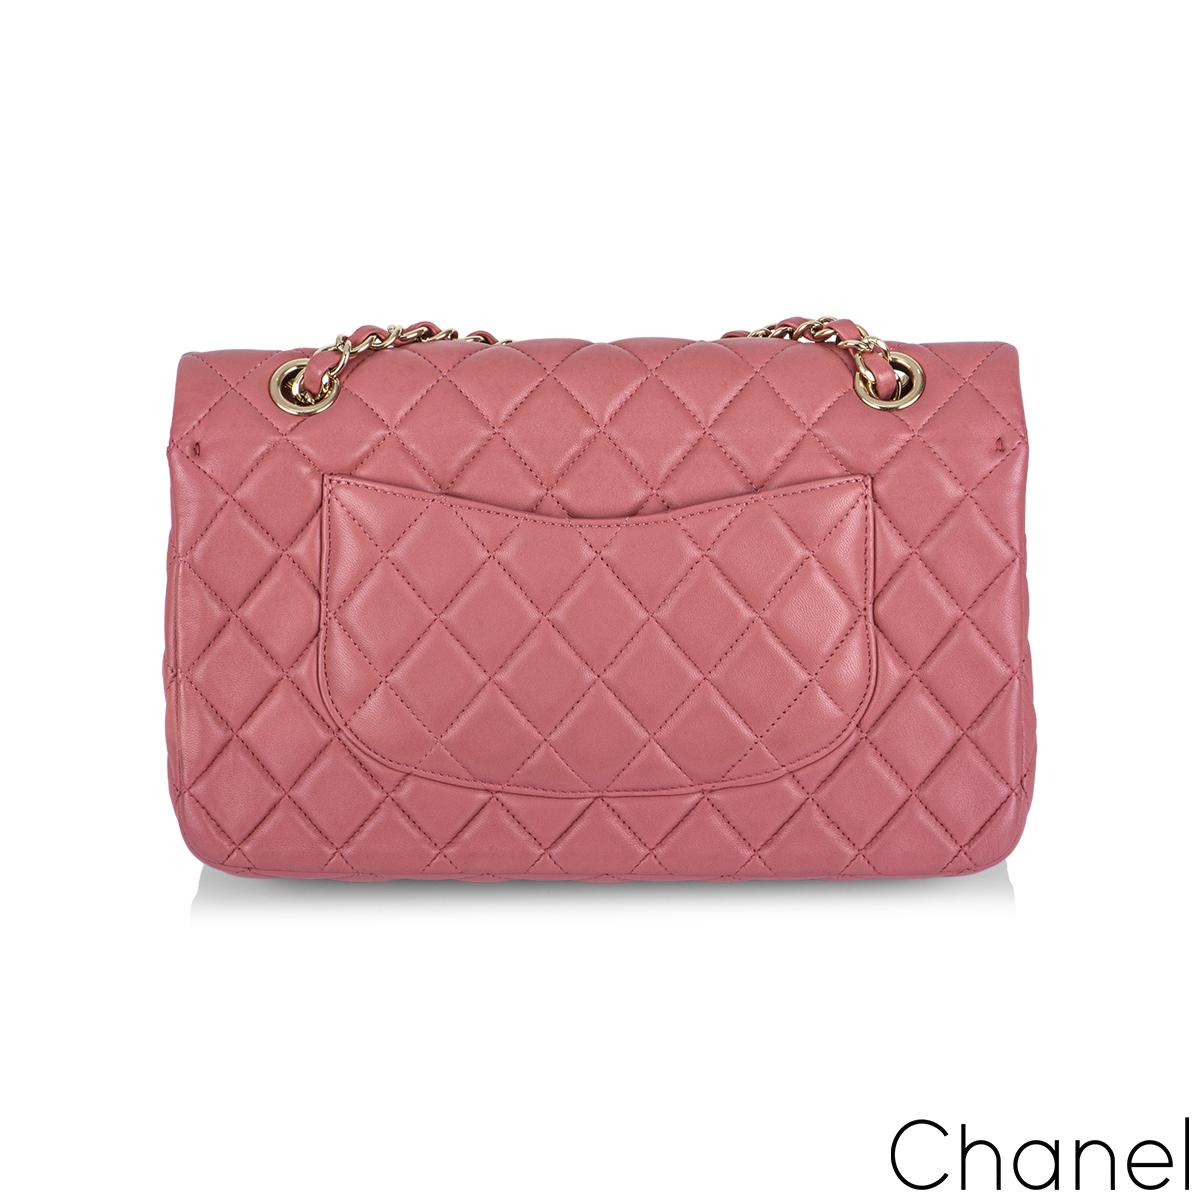 A Timeless Classic Chanel Valentine 2014 Medium Flap handbag. The exterior of this medium Timeless Classic is crafted with a beautiful dusty rose lambskin leather with gold tone hardware. The medium flap is designed with the signature diamond style